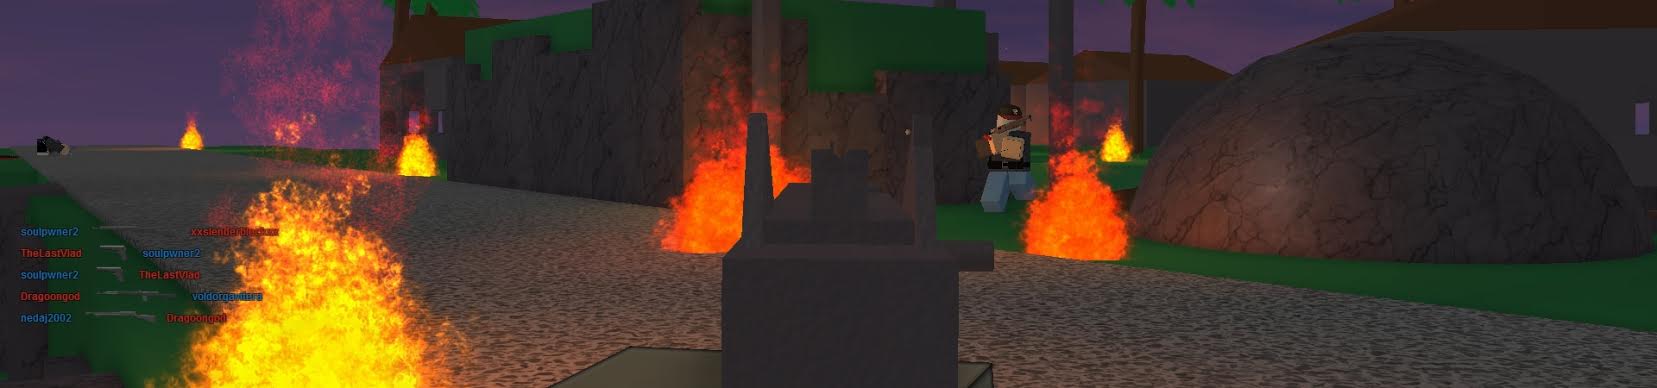 Roblox Explosion Effect